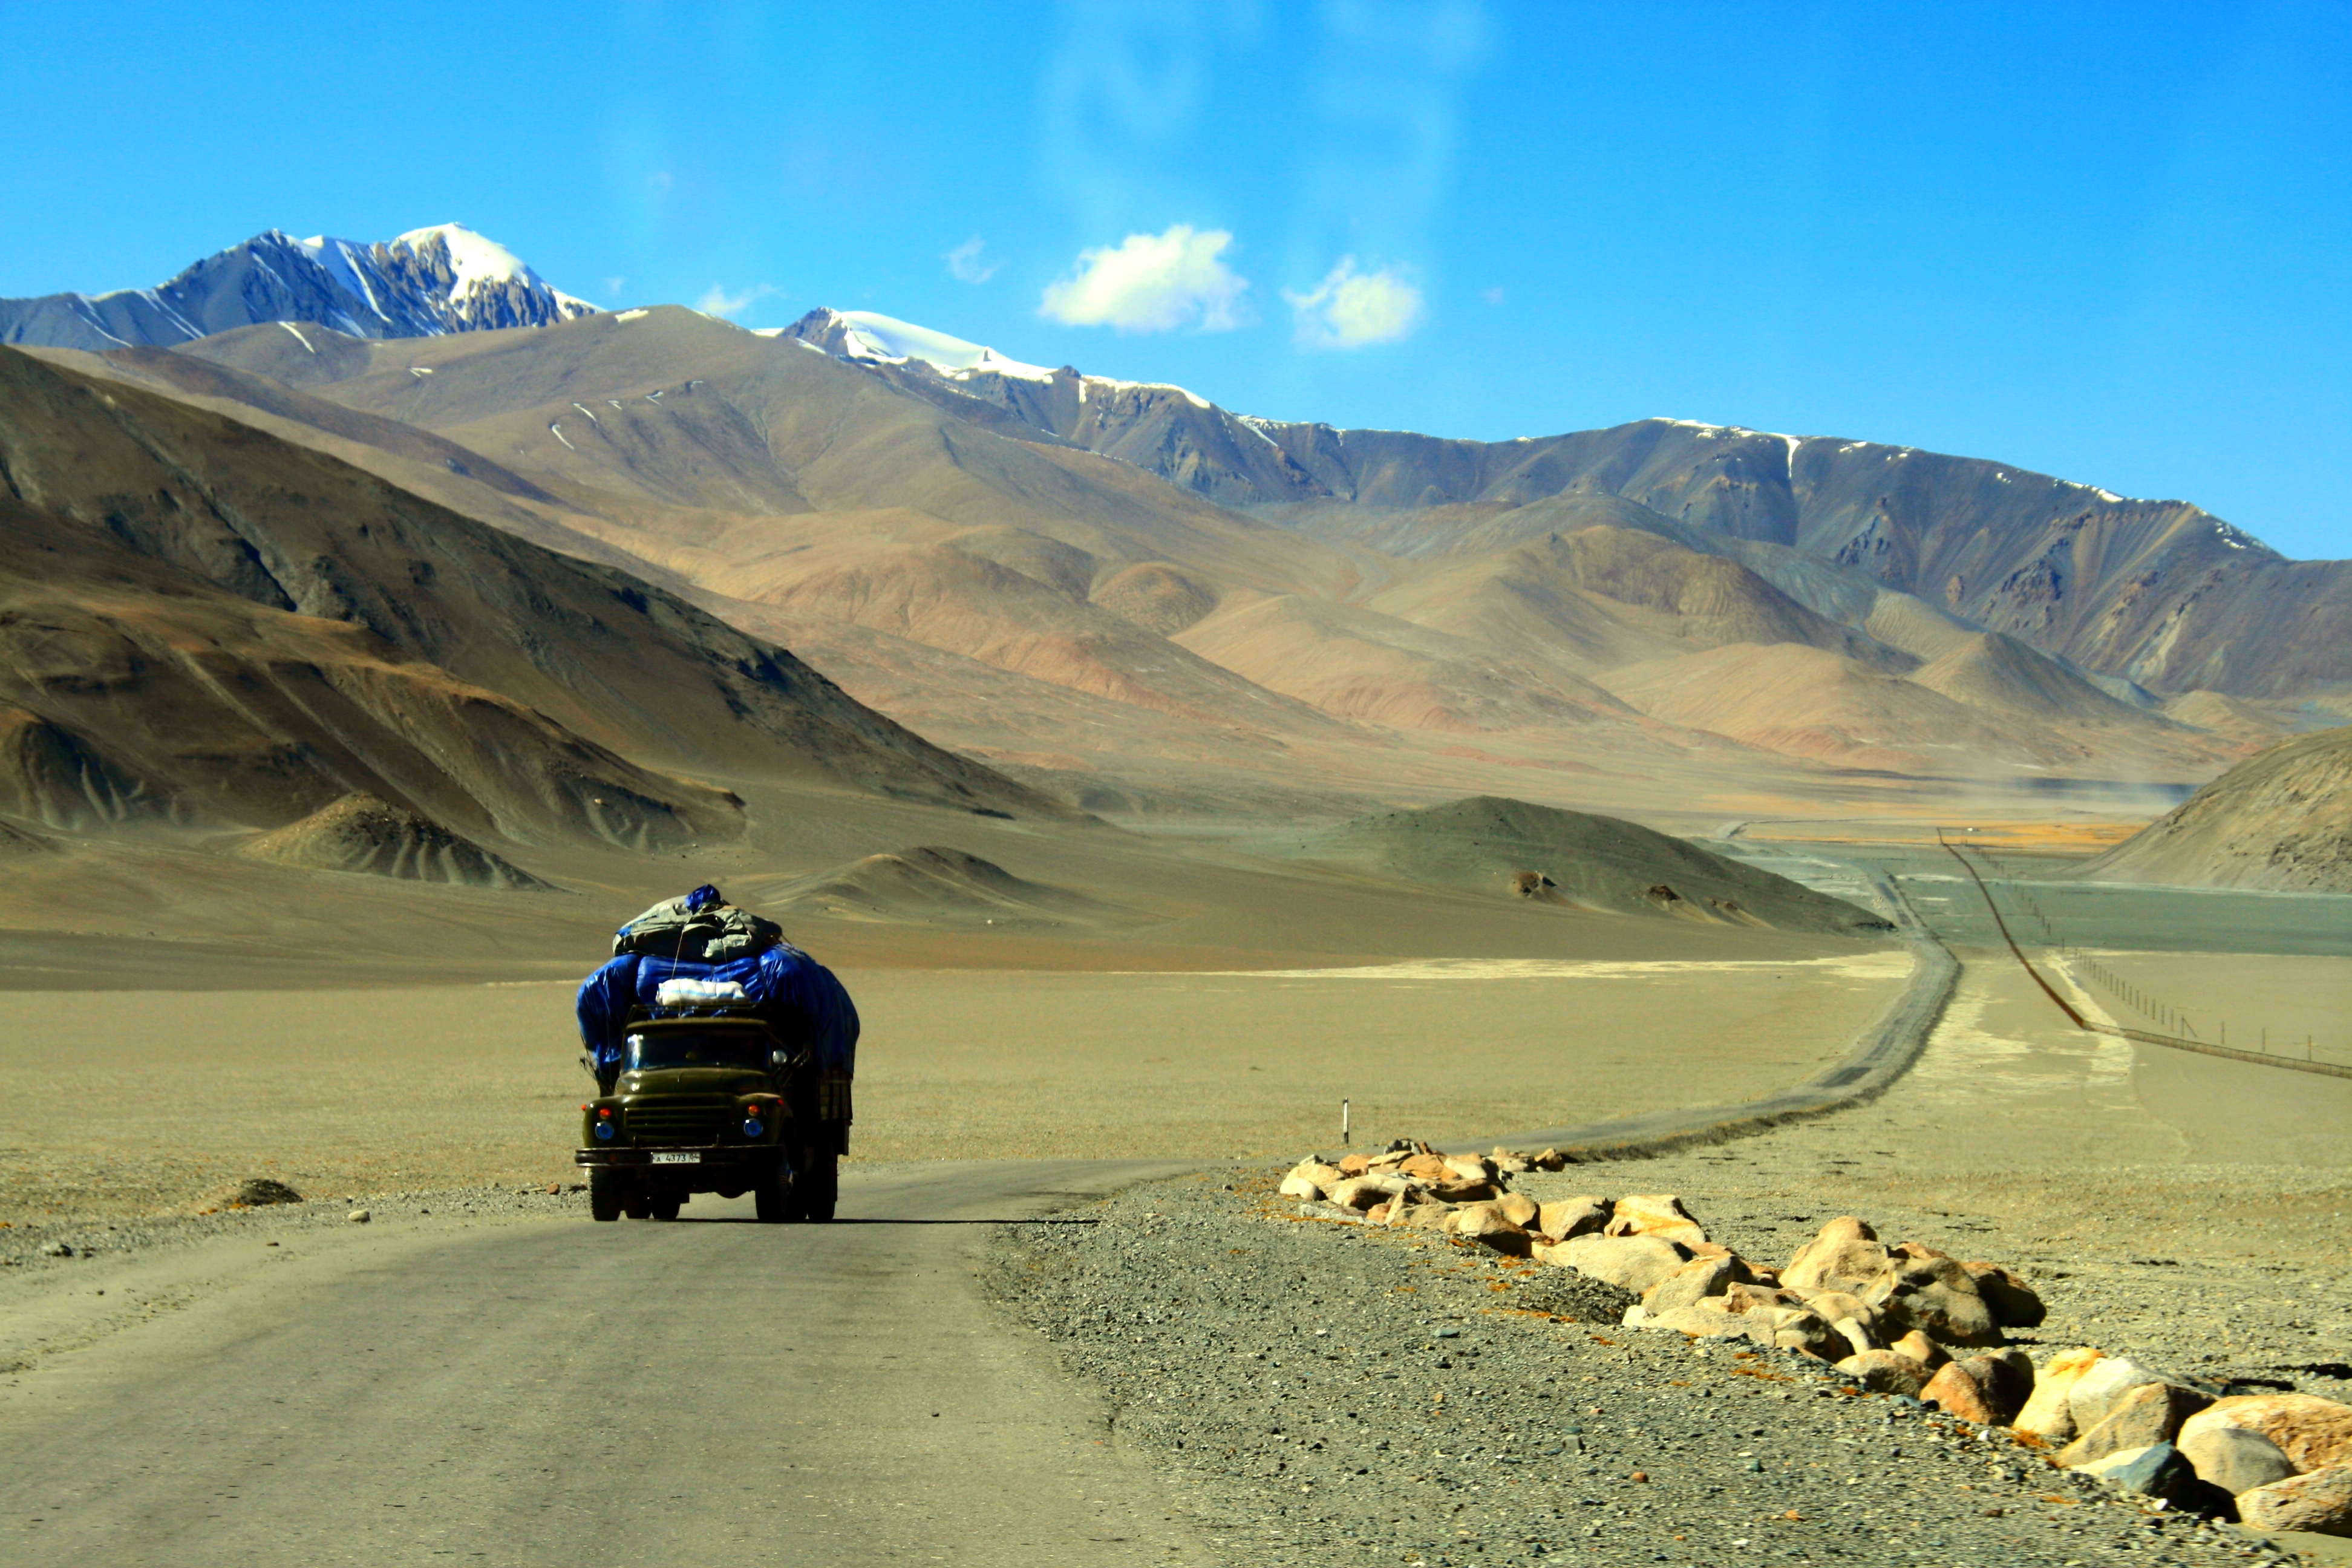 A truck drives in the Pamir Mountains in Tajikistan. Prime Minister Shinzo Abe pledged various forms of aid for the five Central Asian nations, but China is making far more transport upgrades in the region. | KVITLAUK / CC-BY-SA-2.0